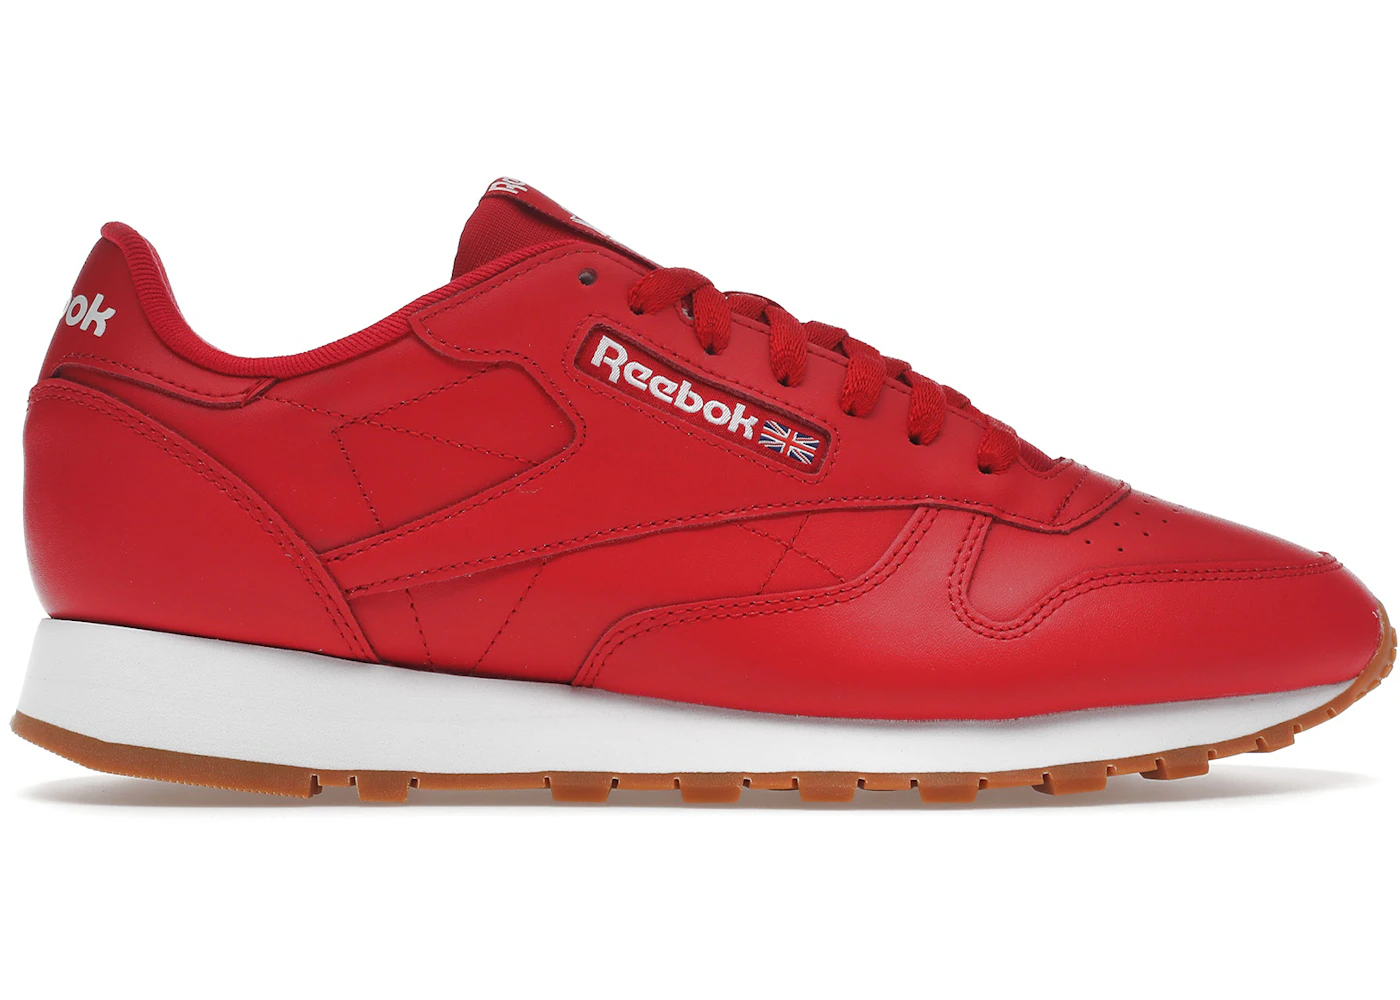 Footwear GY3601 Classic Men\'s - - Reebok Red US White Leather